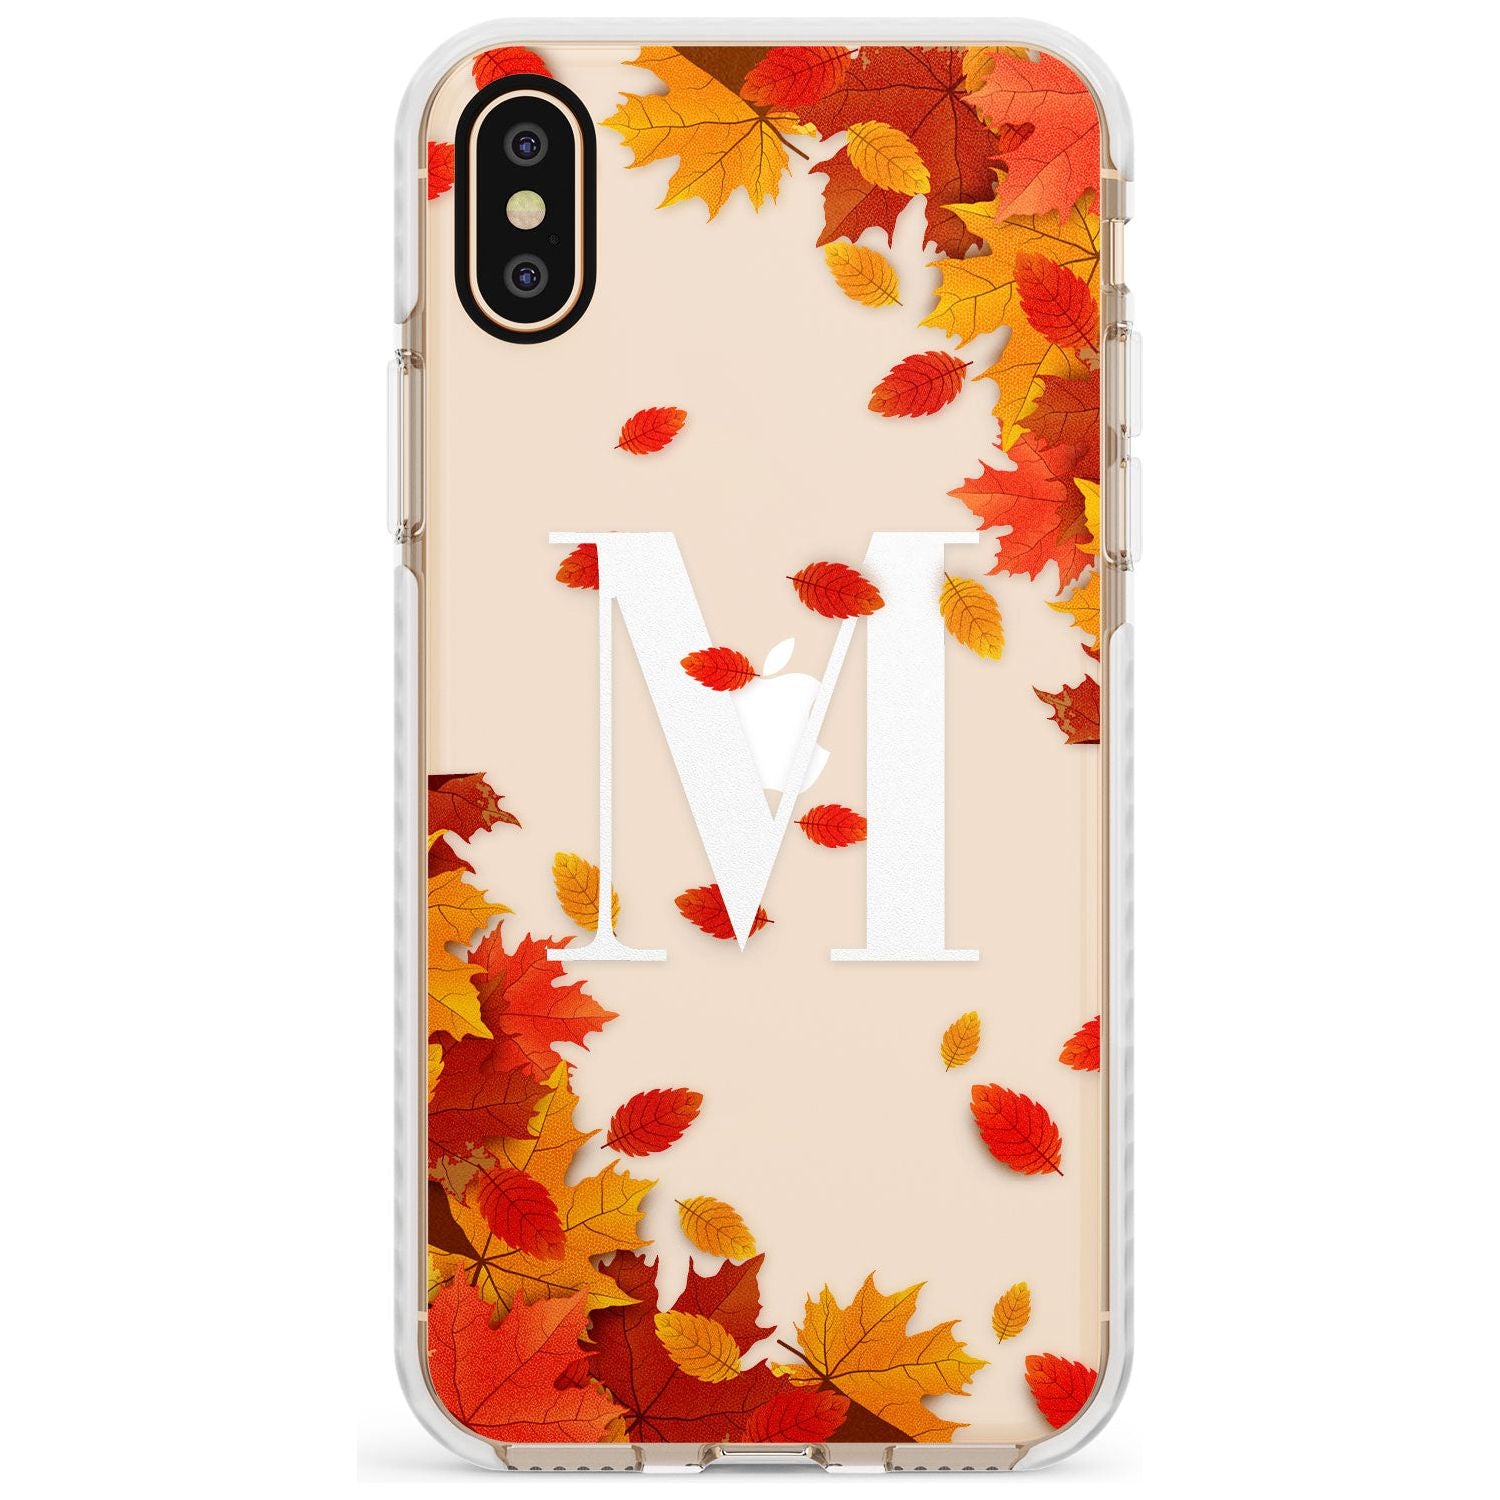 Personalised Monogram Autumn Leaves Impact Phone Case for iPhone X XS Max XR